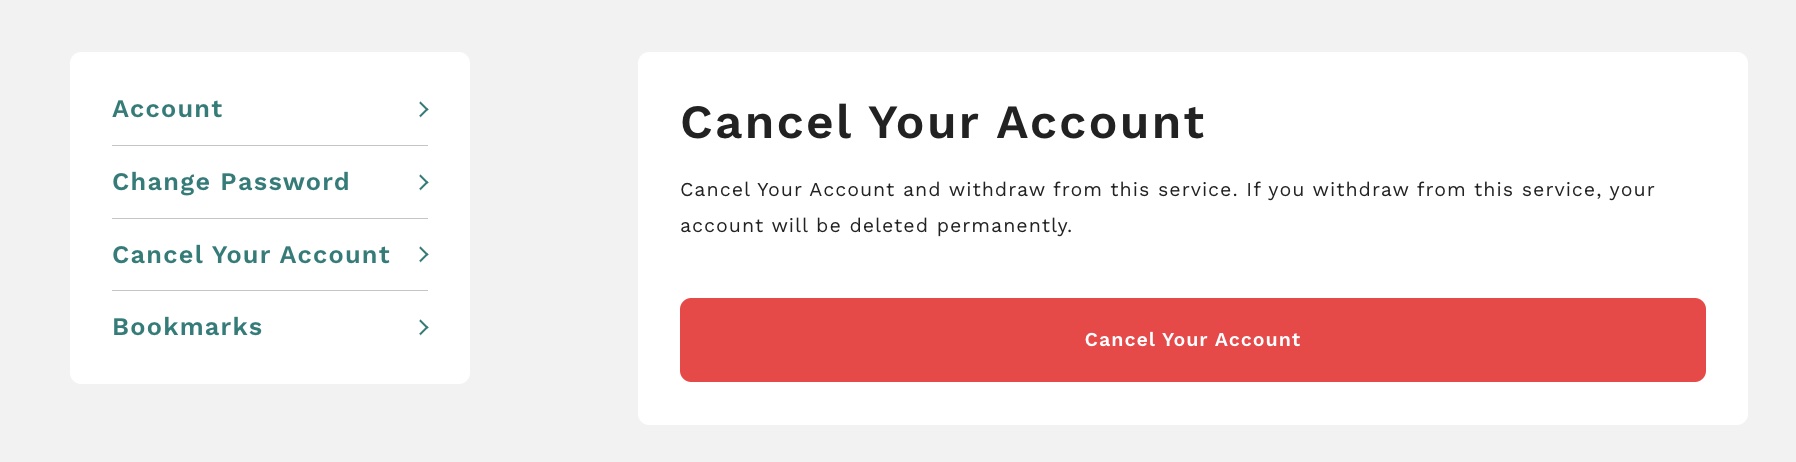 Cancel Your Account